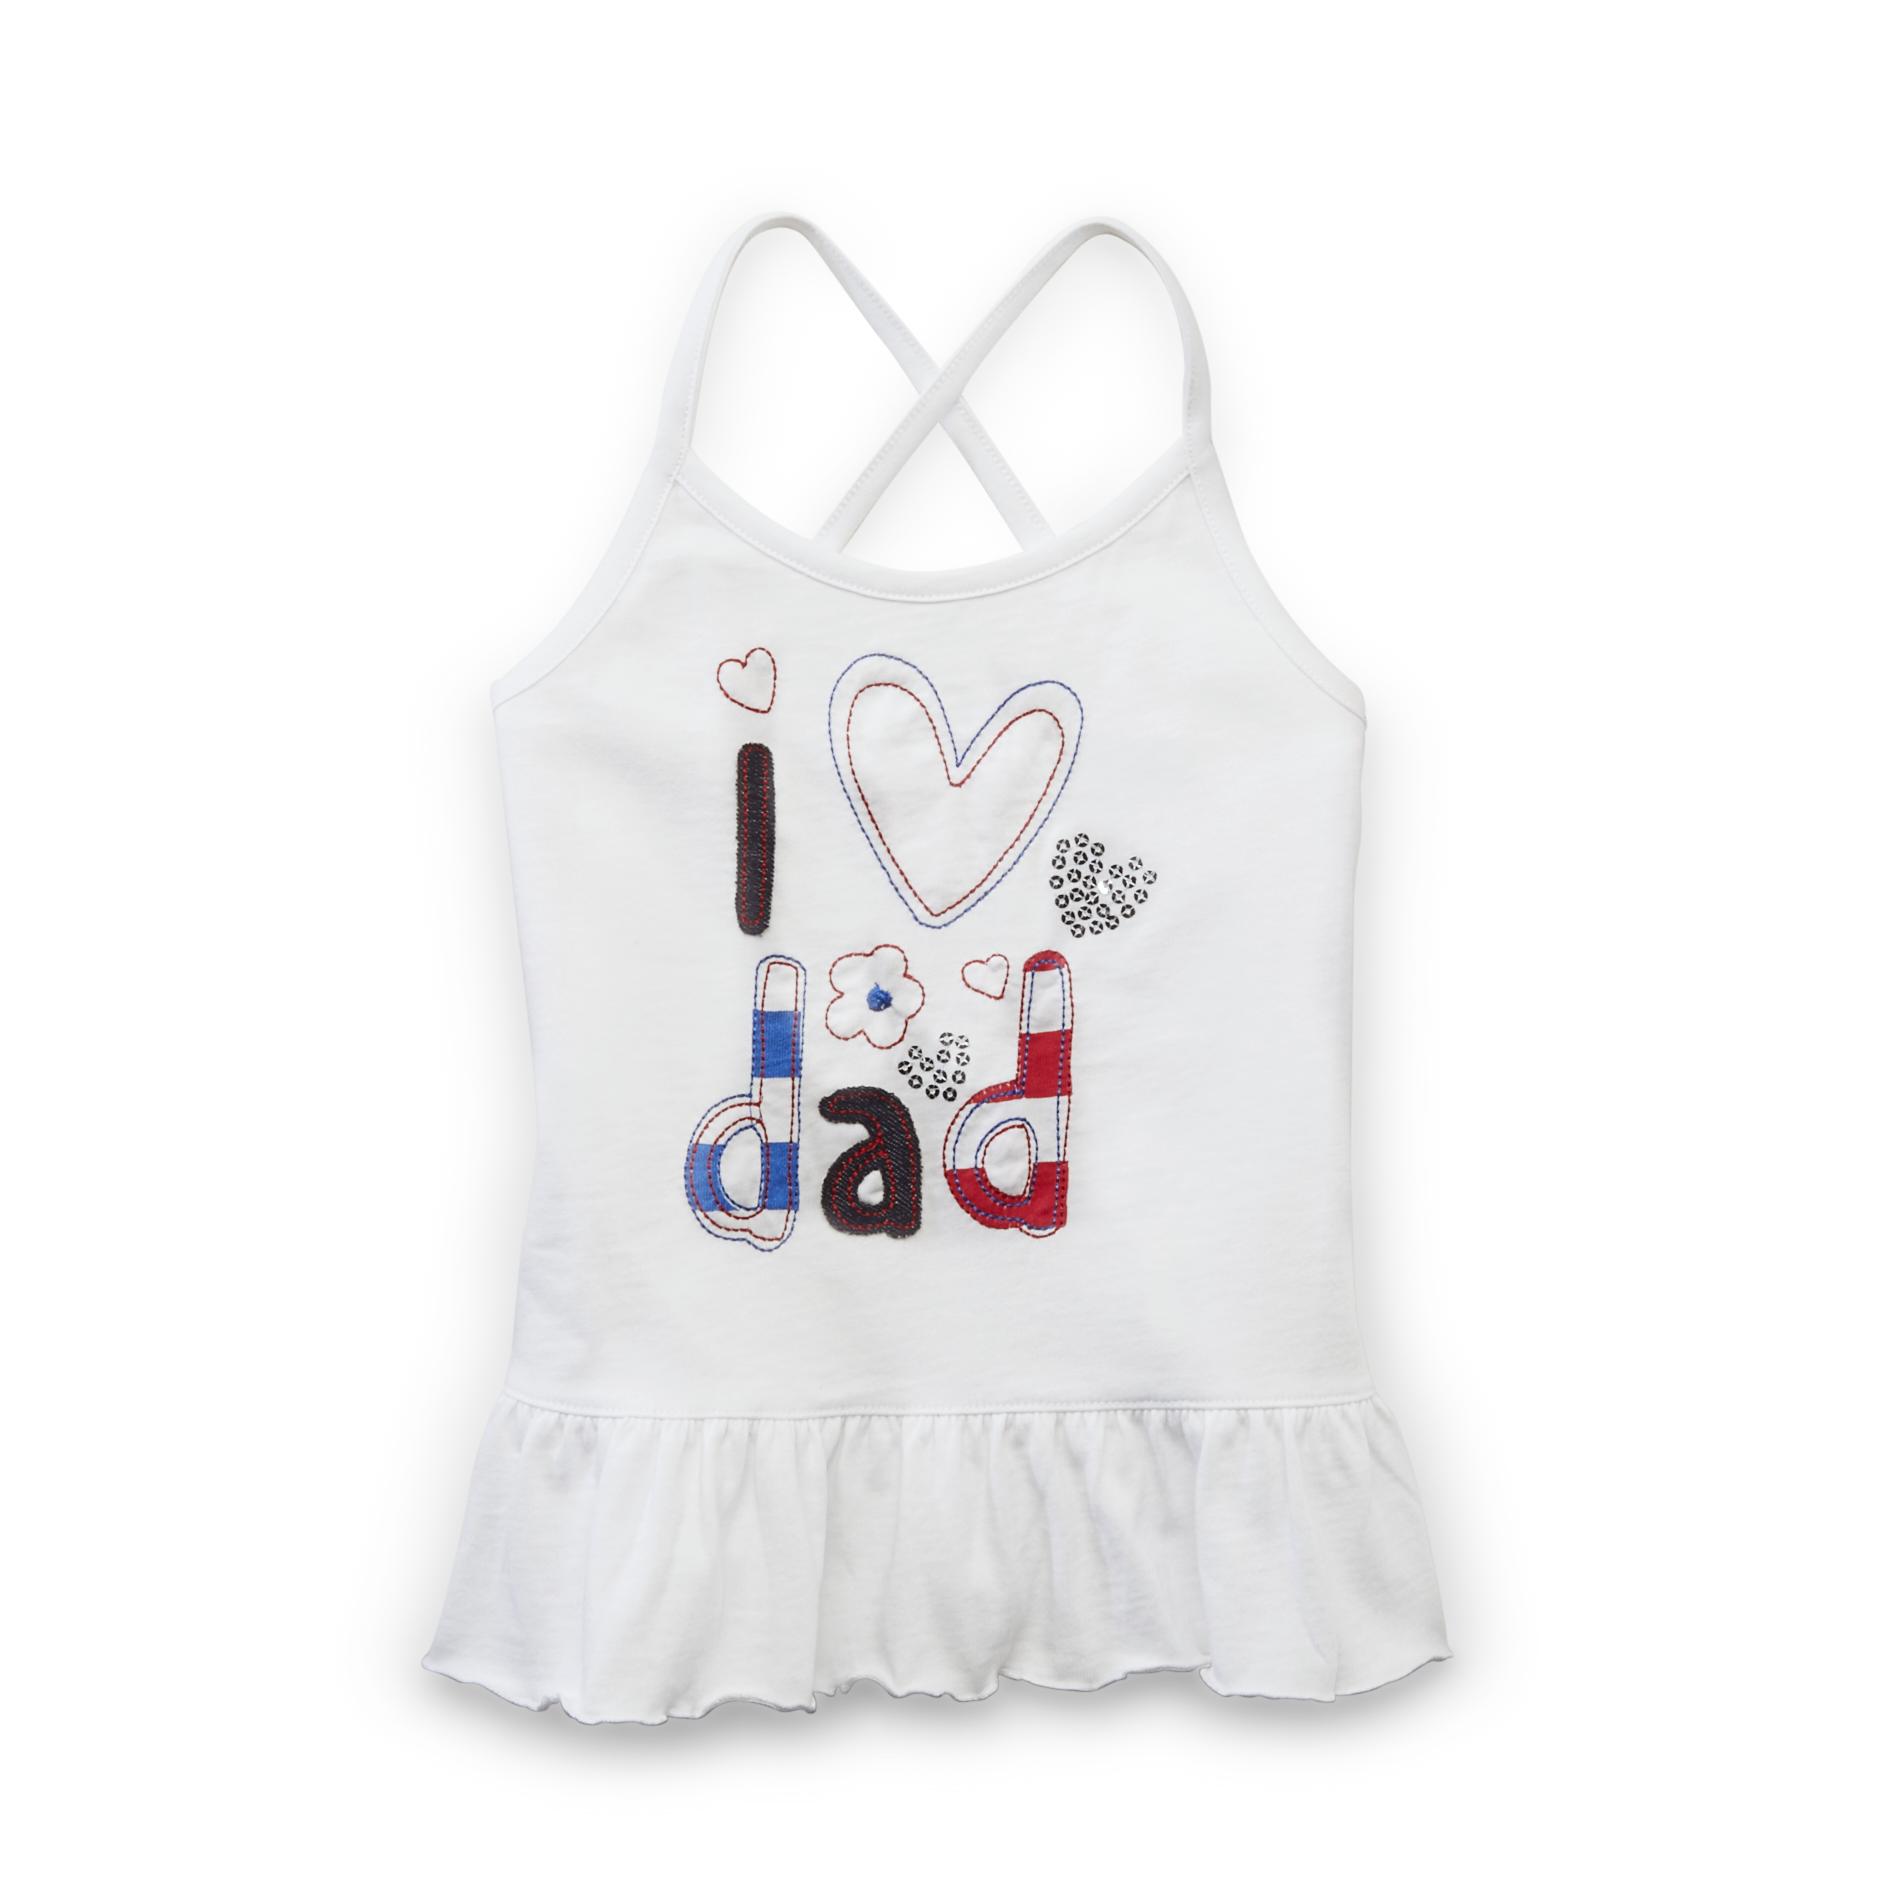 Toughskins Infant & Toddler Girl's Strappy Tank Top - I Heart Dad